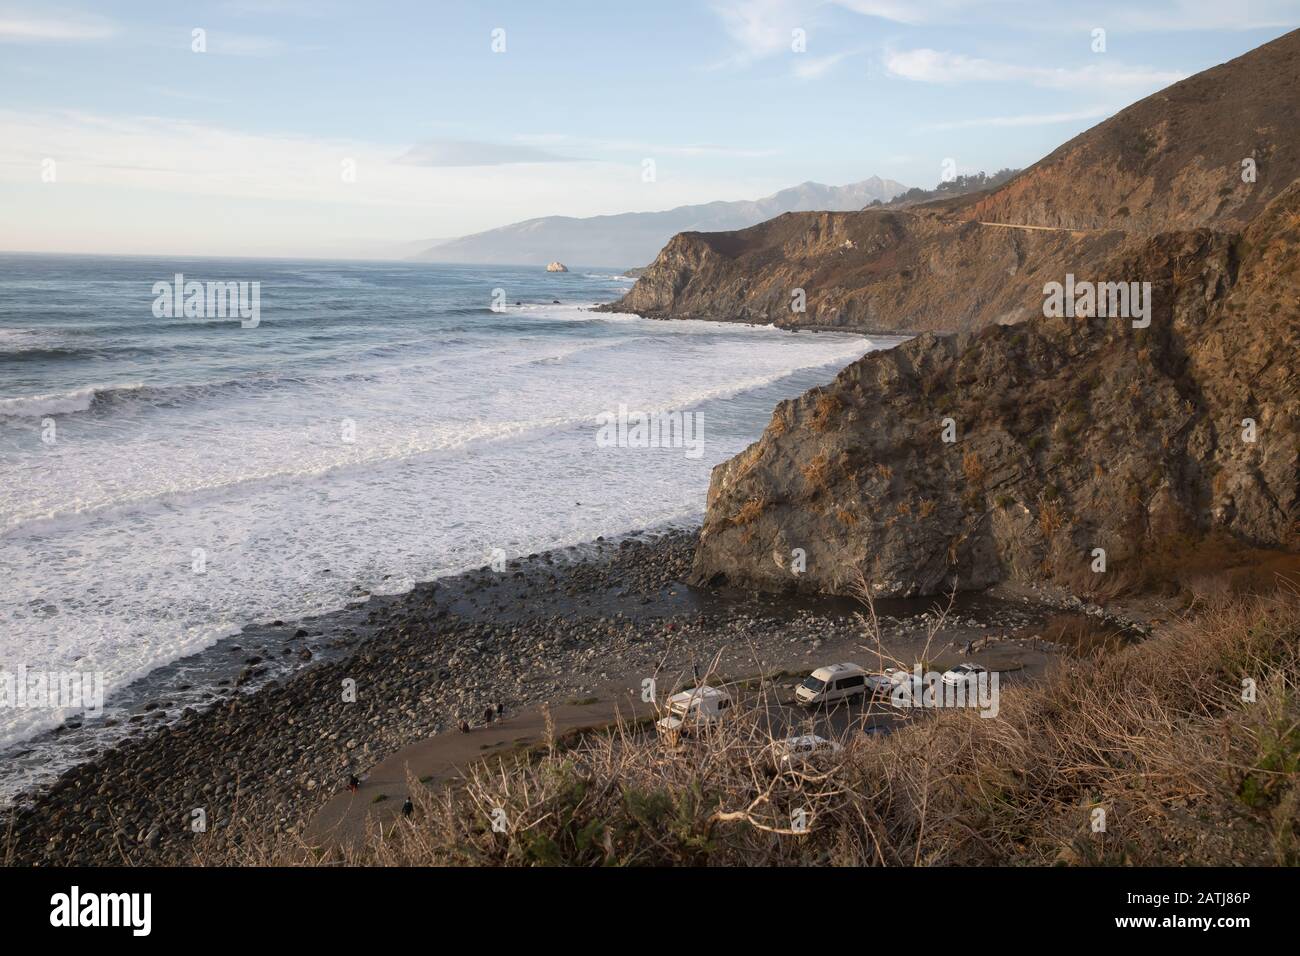 View from Willow Creek Beach, California,usa on a winter's day Stock Photo